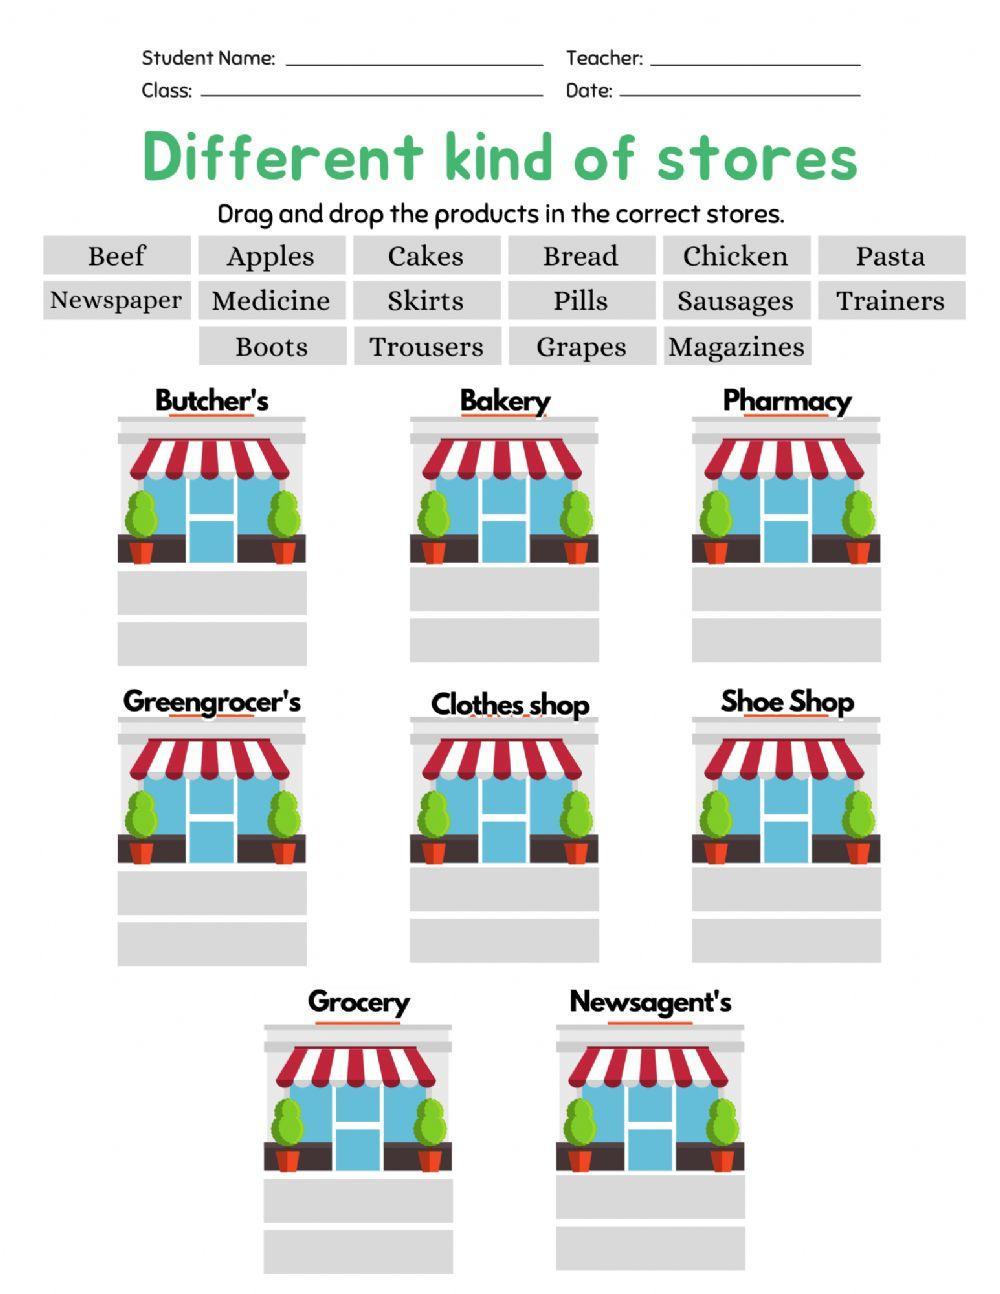 Different Kind of Stores